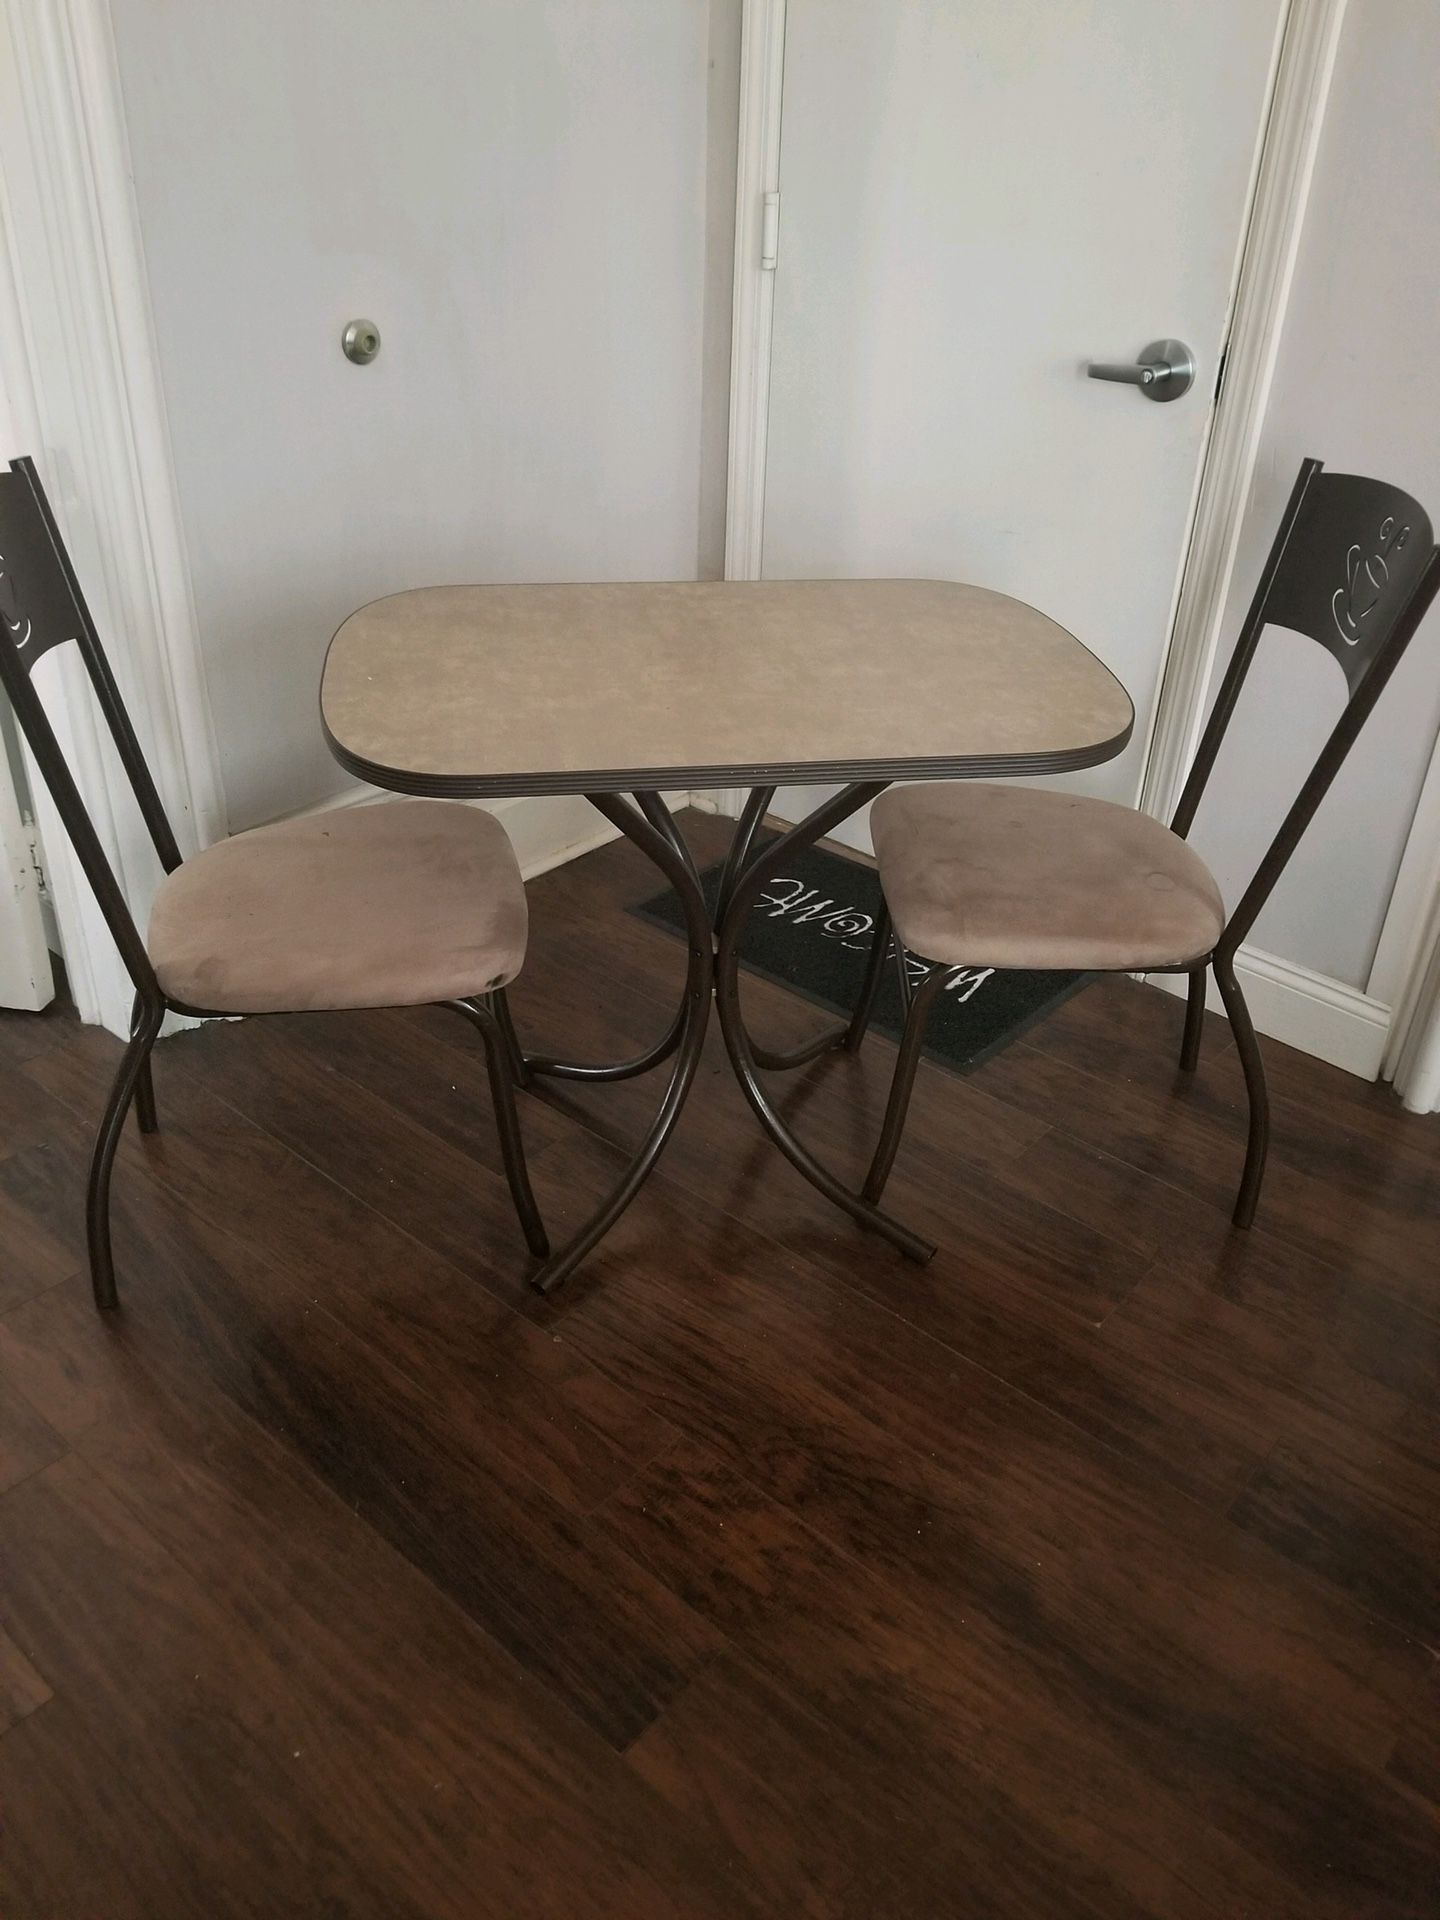 Used small kitchen table w/ chairs